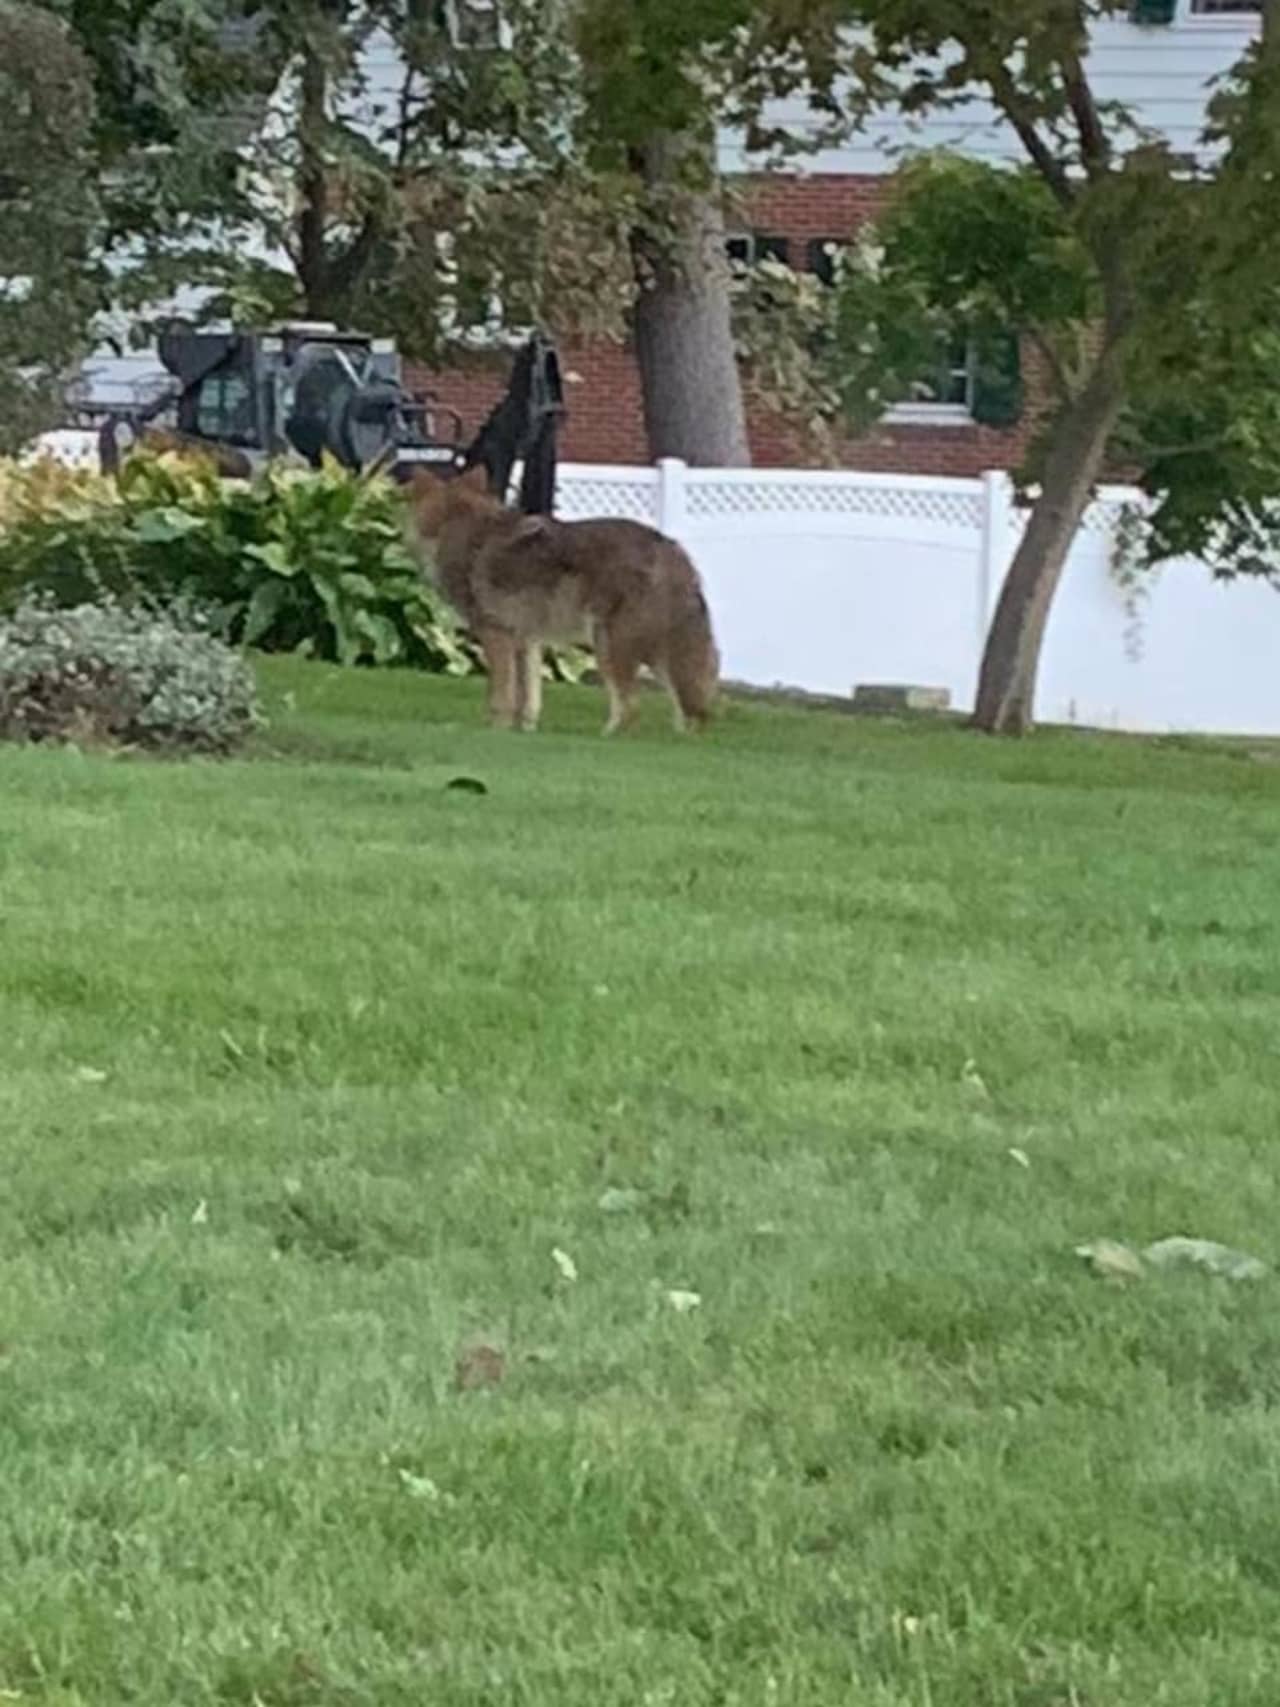 This coyote was spotted in the backyard of a New Rochelle home.